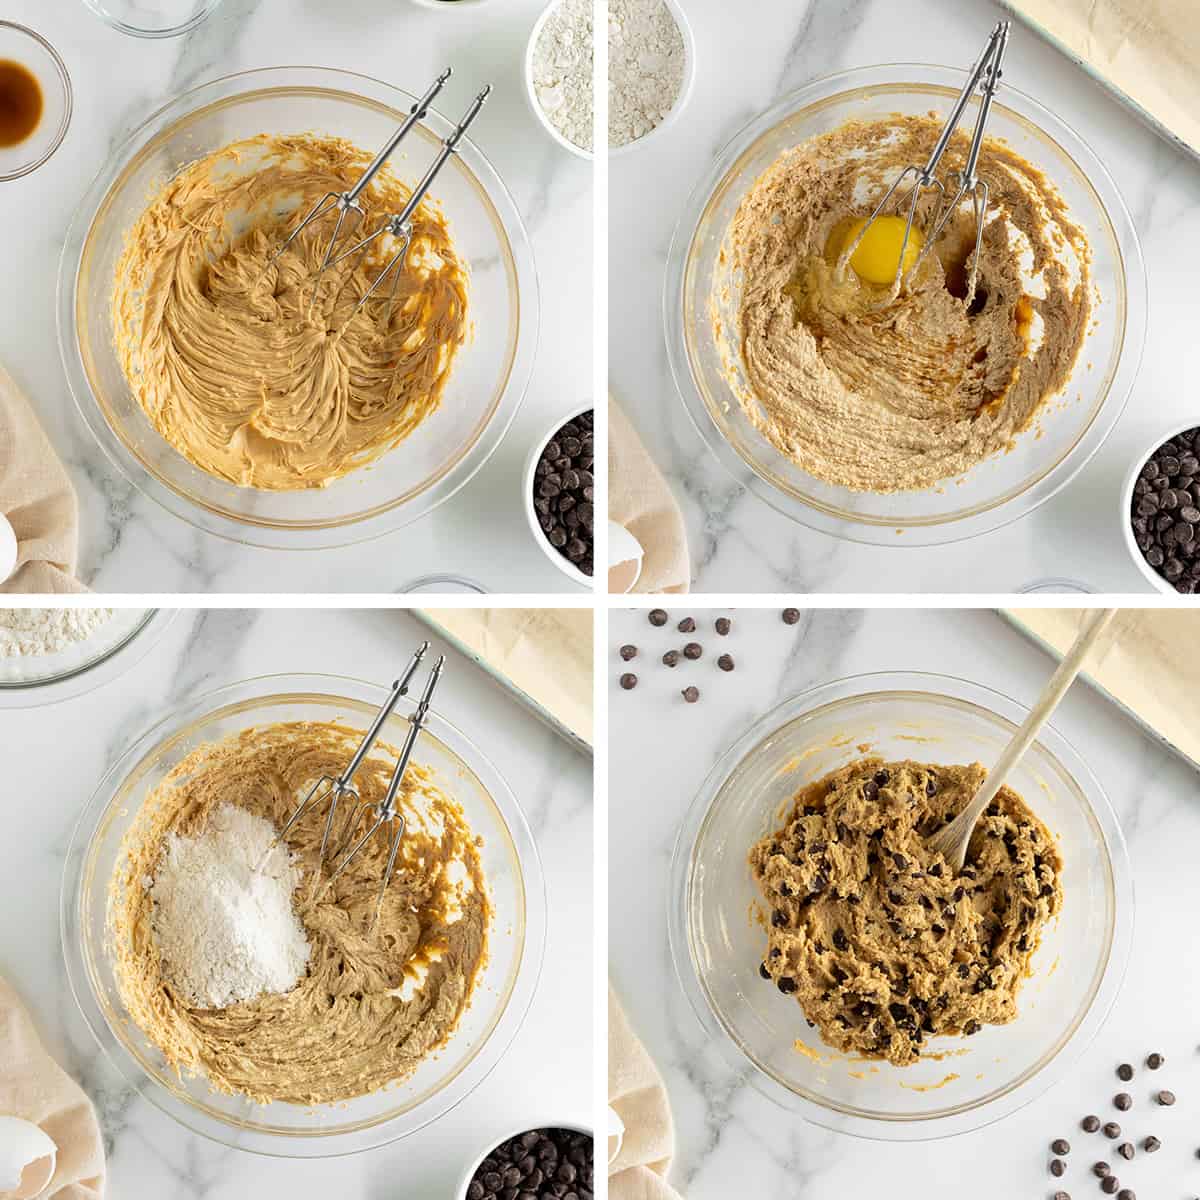 Four images of cookie dough ingredients being combined in a glass mixing bowl.